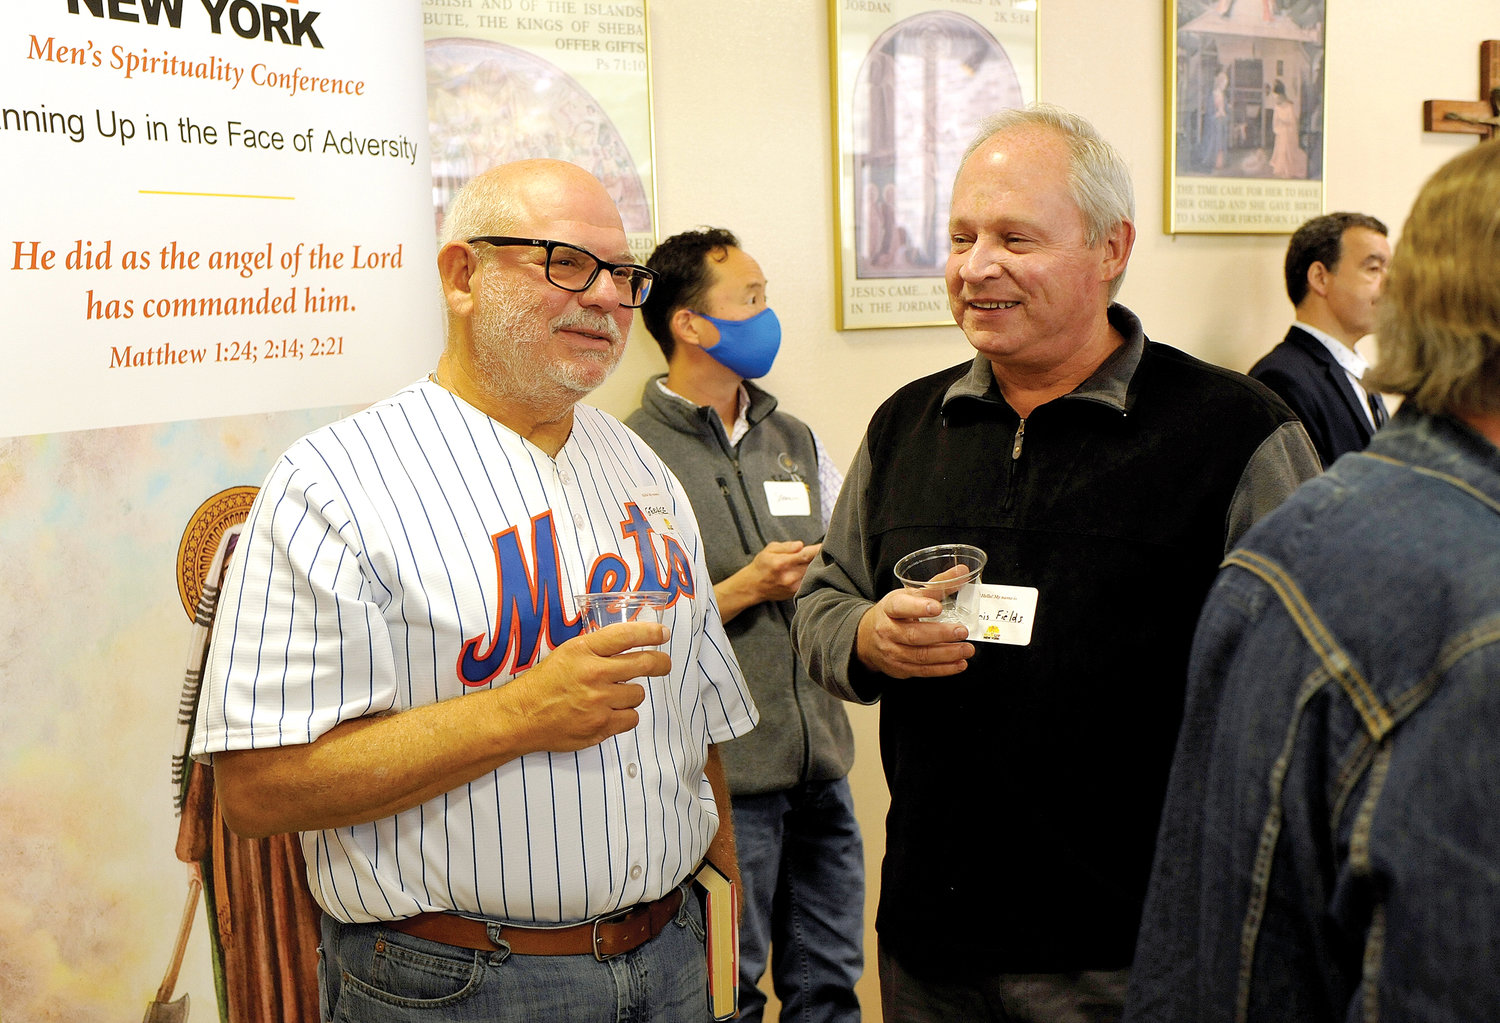 George Knapp of Holy Trinity parish in Poughkeepsie shows his allegiance to the New York Mets and speaker Mike Piazza at the ManUp New York men’s spirituality conference Oct. 23. With him is Chris Fields of St. Martin de Porres, Poughkeepsie.